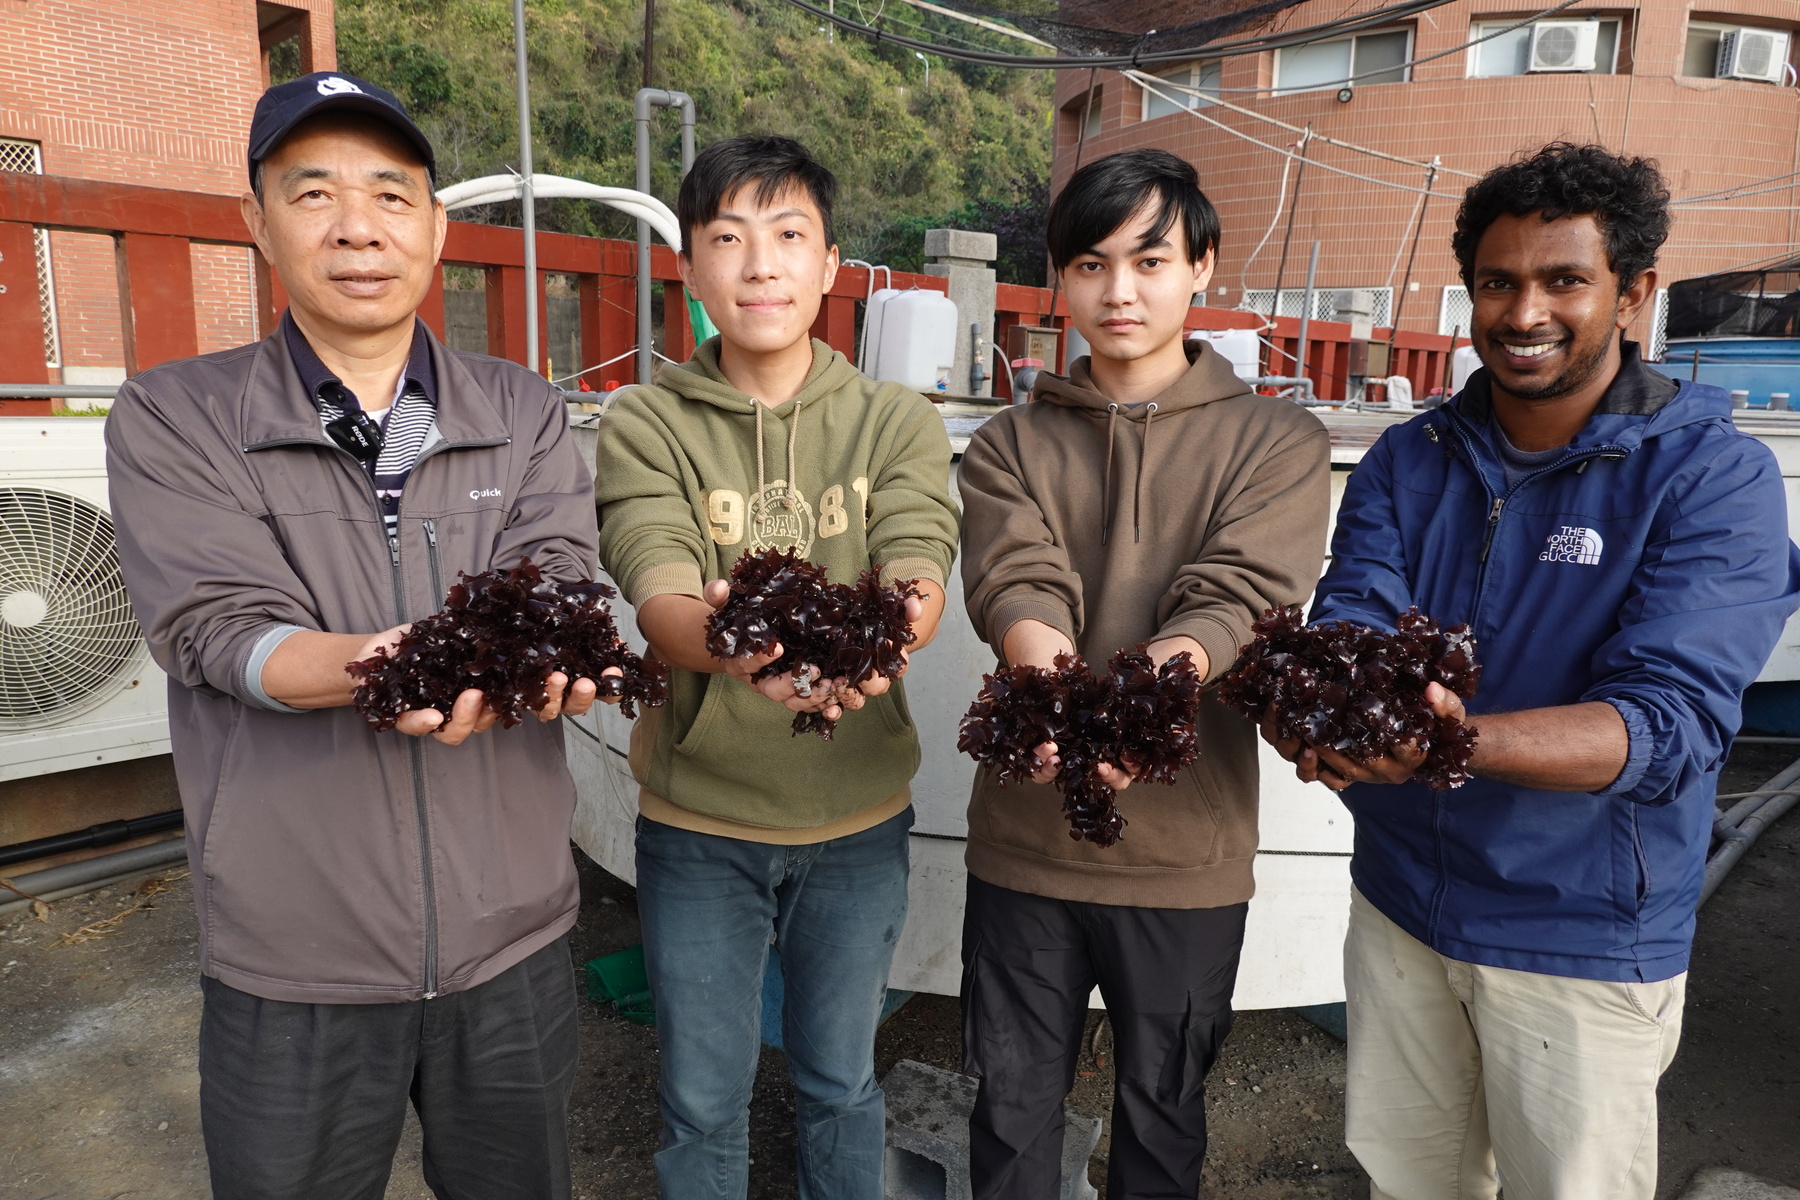 The research team led by Professor Chin-Chang Hung (first from the left of the photo), Dean of the College of Marine Sciences at NSYSU, has announced the team’s result that the carbon capture rate of seaweed Sarcodia suae in Taiwan is up to 30 tons per hectare per year, which is twice as high as that of Taipei Daan Forest Park.